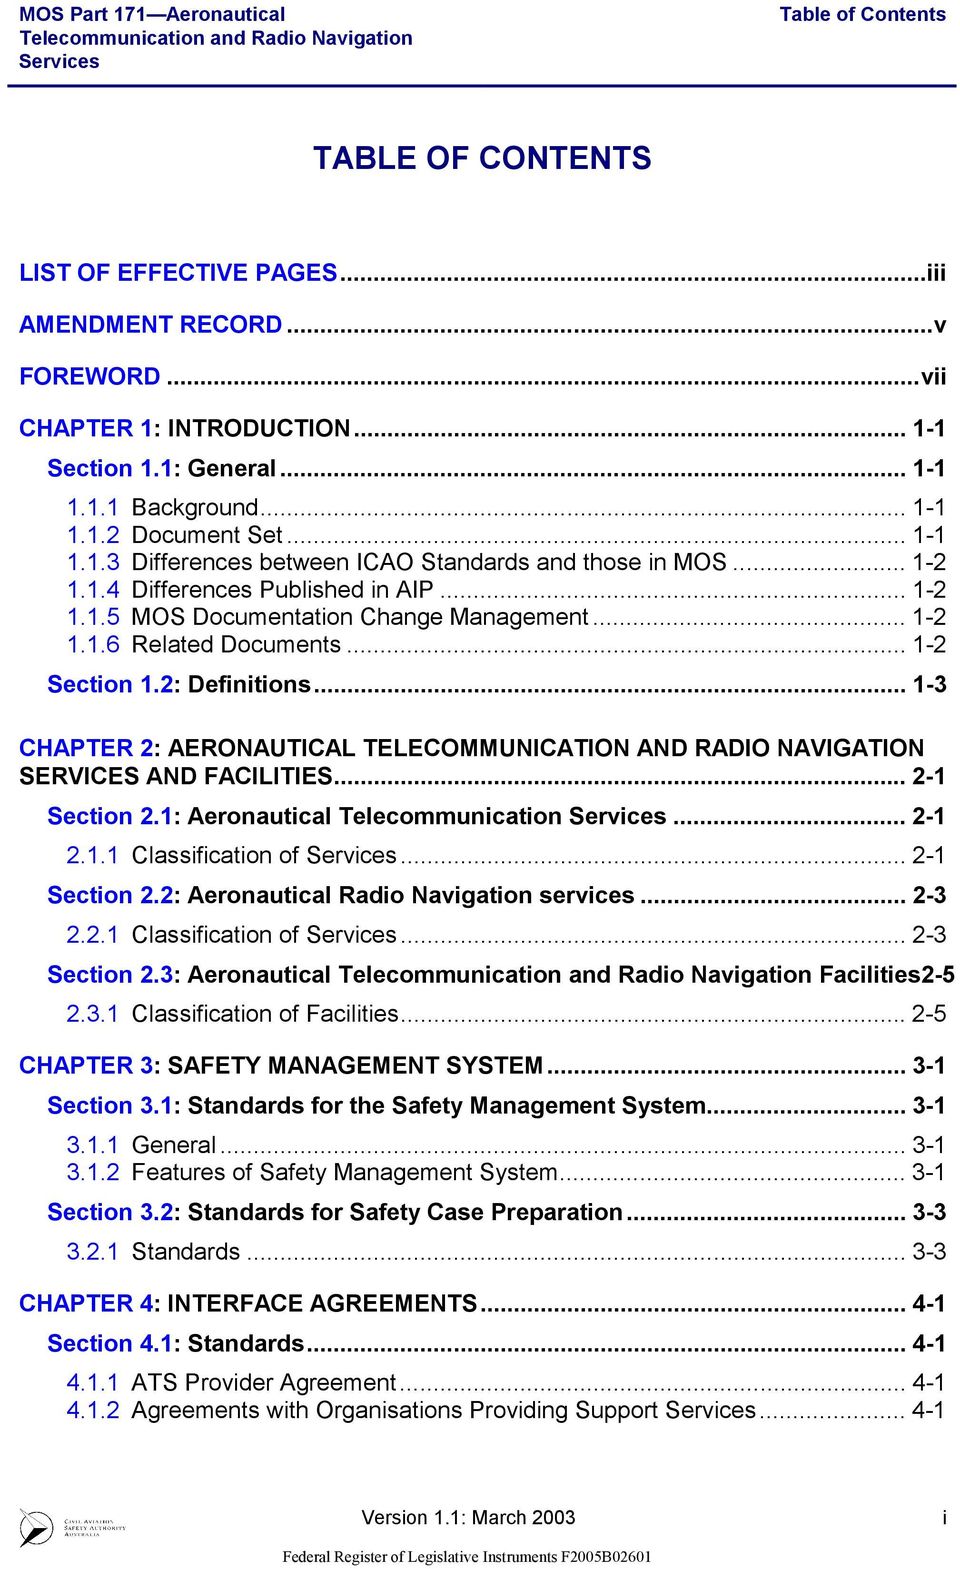 .. 1-2 Section 1.2: Definitions... 1-3 CHAPTER 2: AERONAUTICAL TELECOMMUNICATION AND RADIO NAVIGATION SERVICES AND FACILITIES... 2-1 Section 2.1: Aeronautical Telecommunication... 2-1 2.1.1 Classification of.